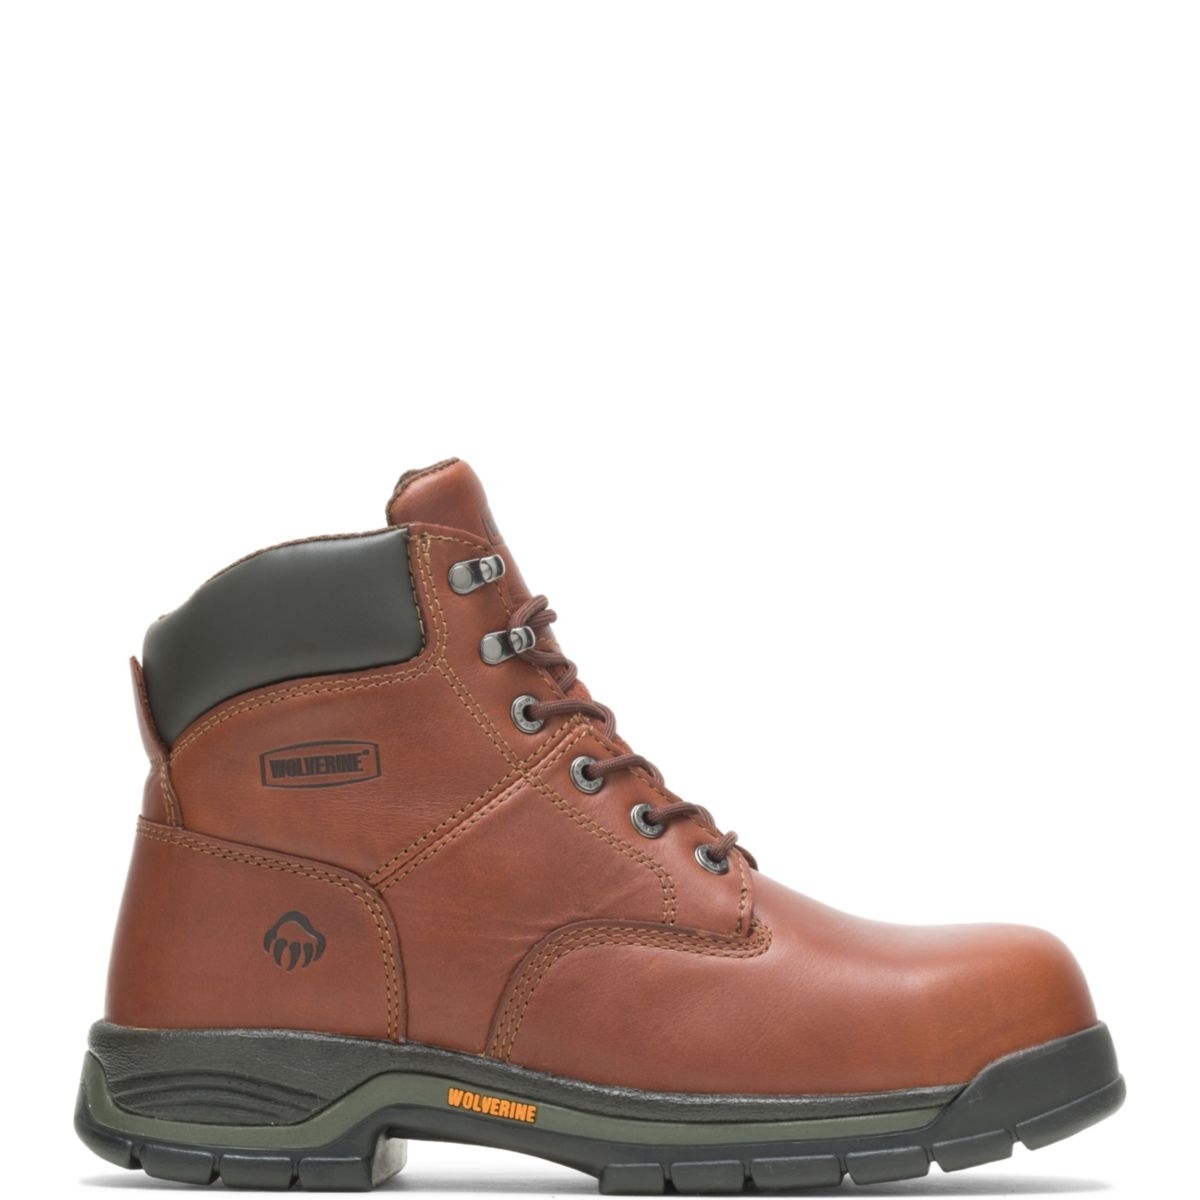 WOLVERINE Men's Harrison 6 Lace-Up SoftToe Work Boot Brown - W04906 Varies BROWN - BROWN, 9